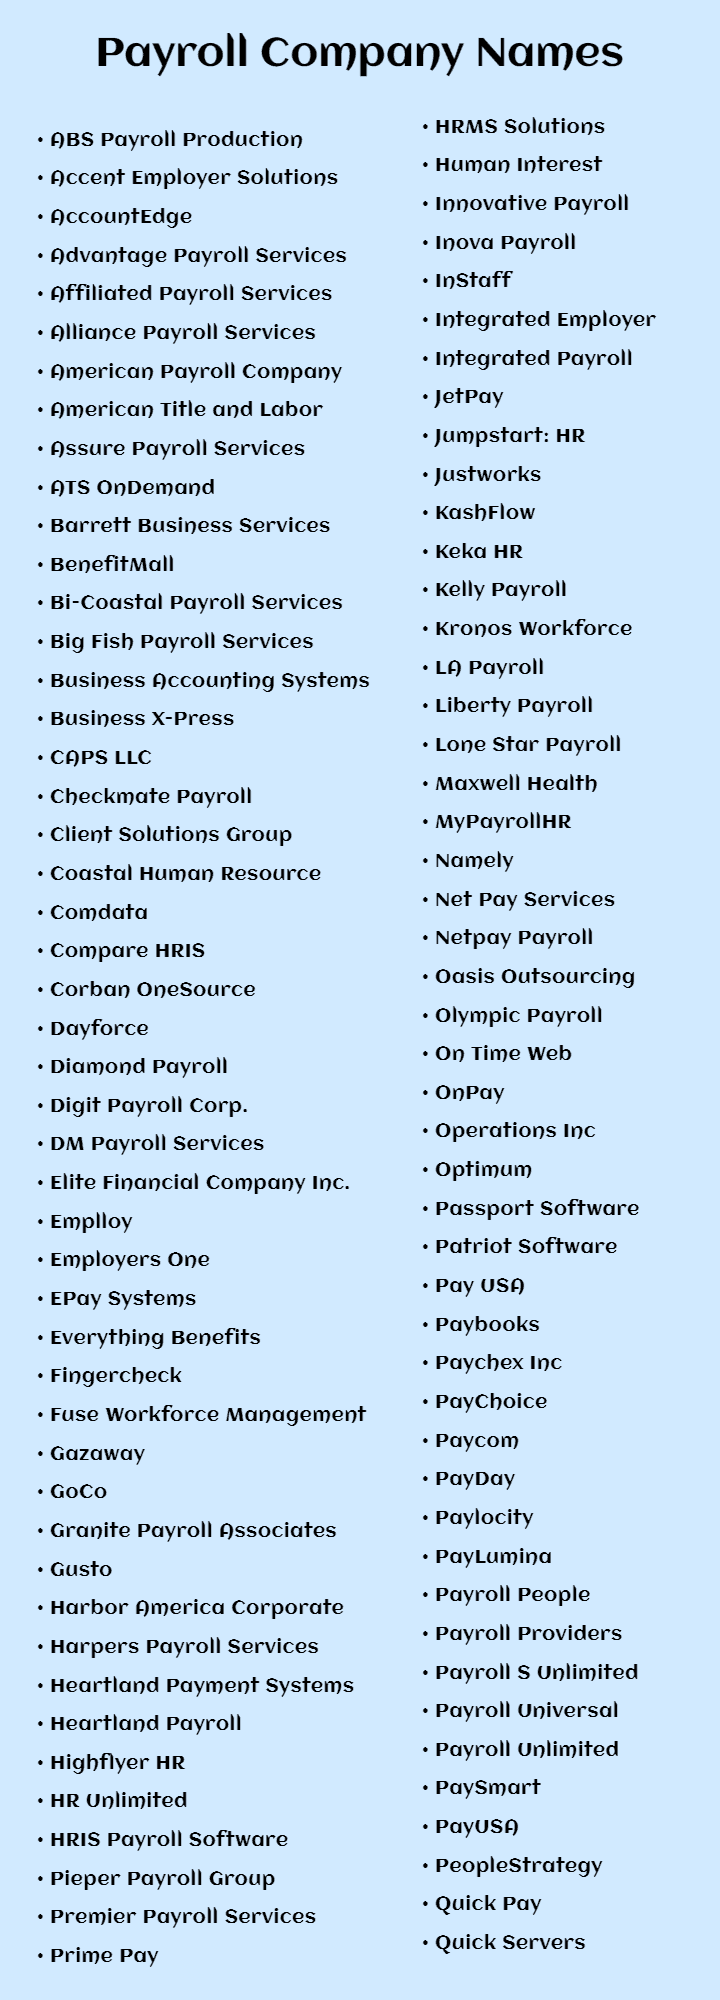 Payroll Company Names: the payroll companies for small business